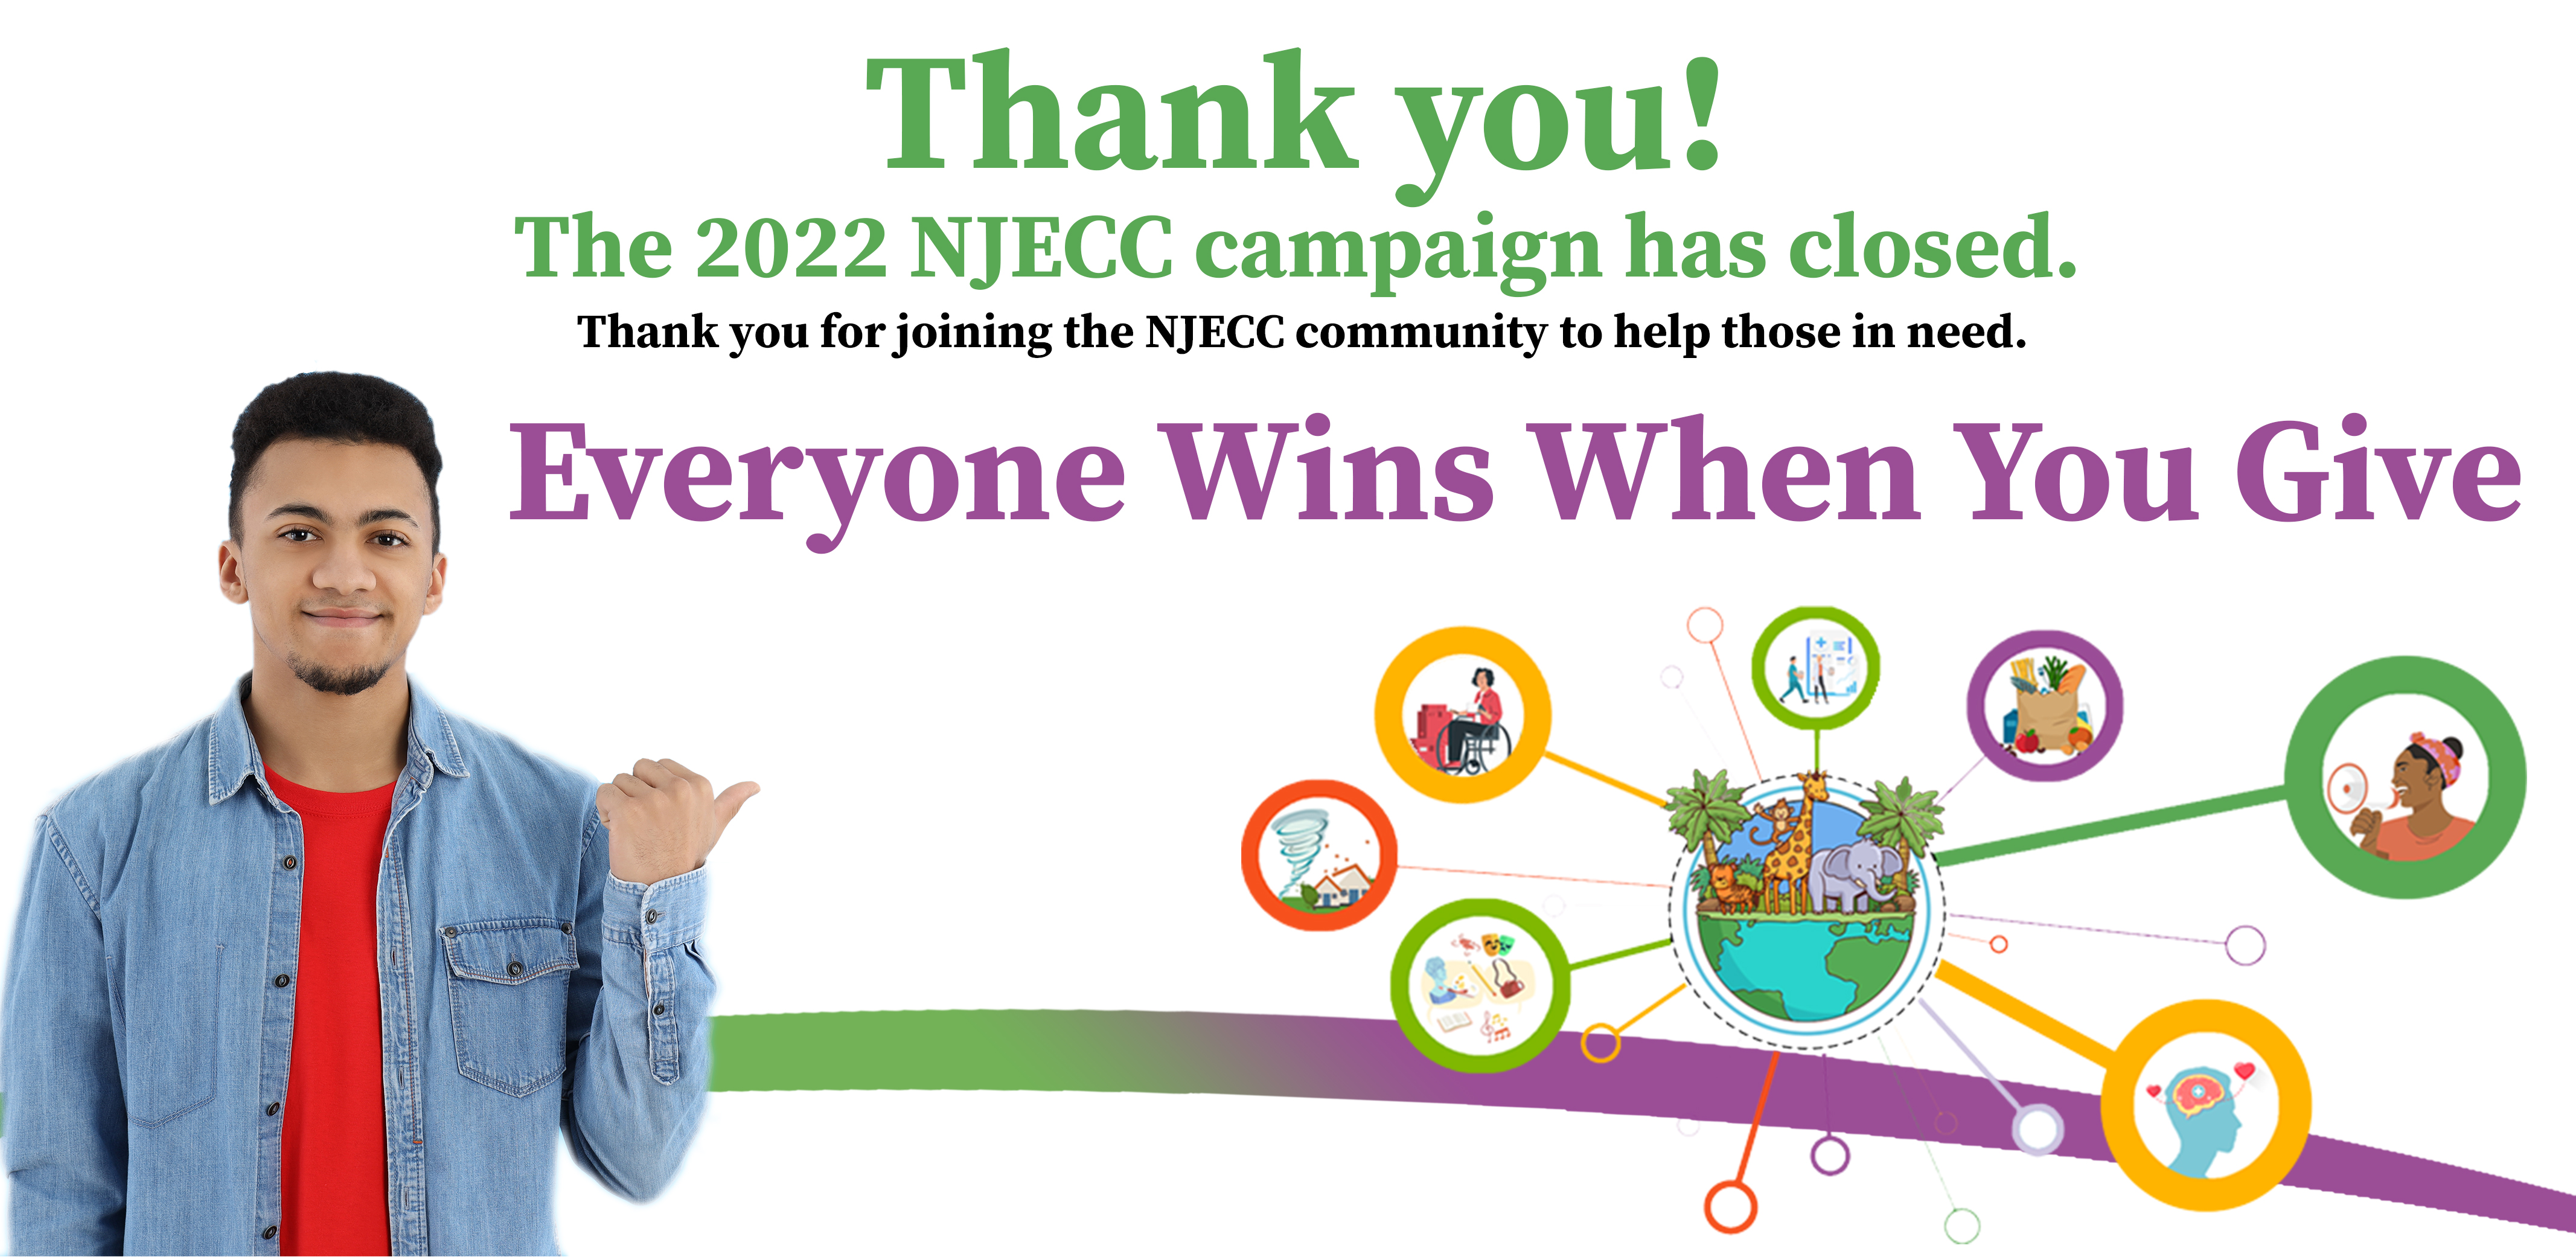 The NJECC has been extended to Jan 15th! Donate now